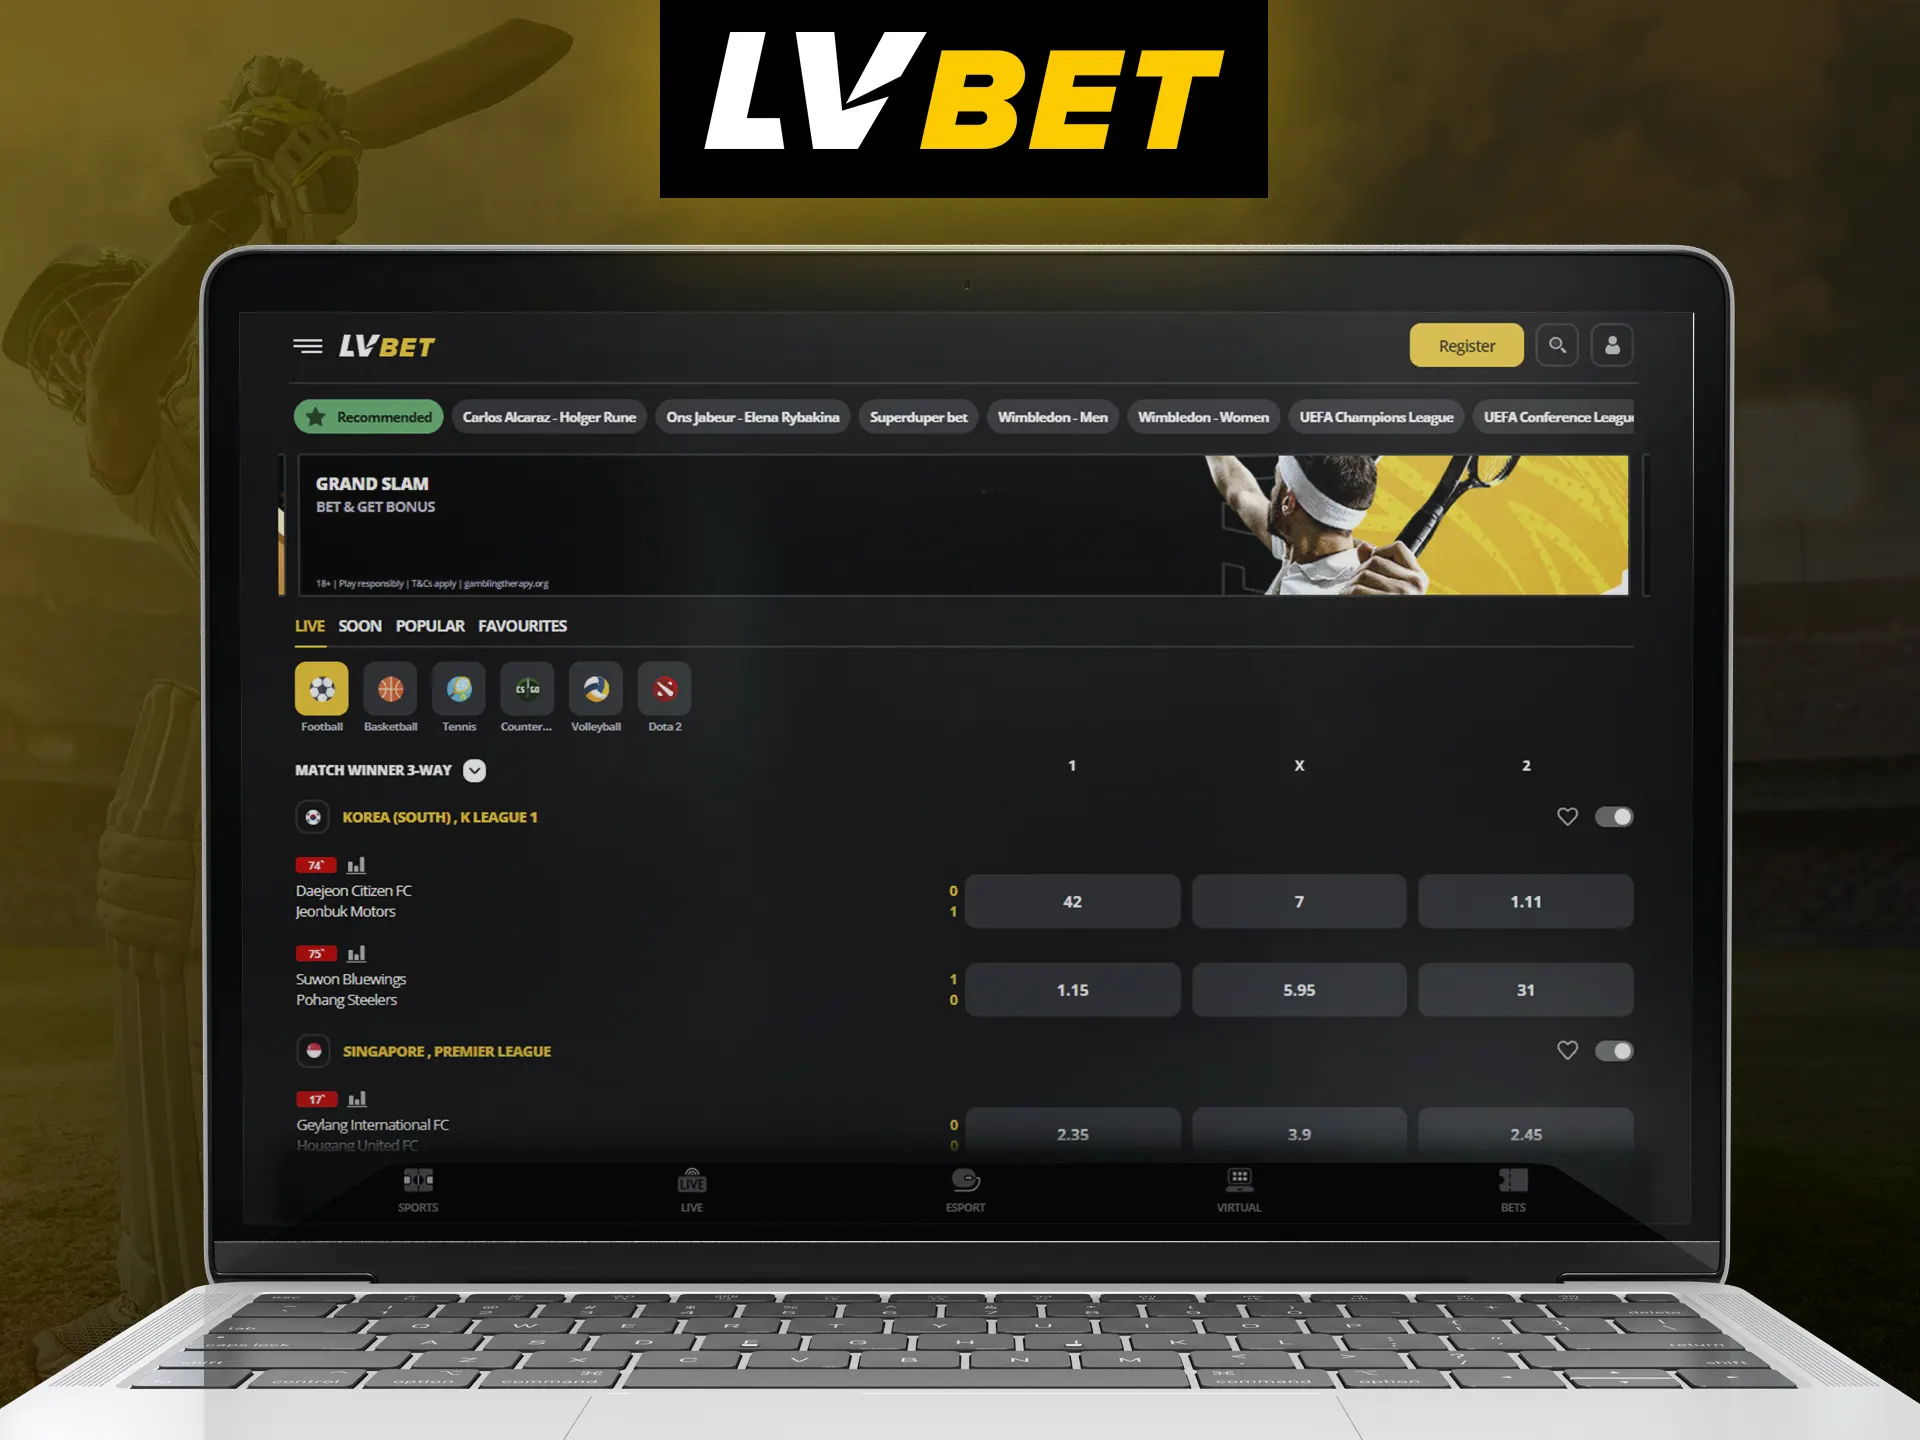 LV Bet has a user-friendly official website with lots of features.